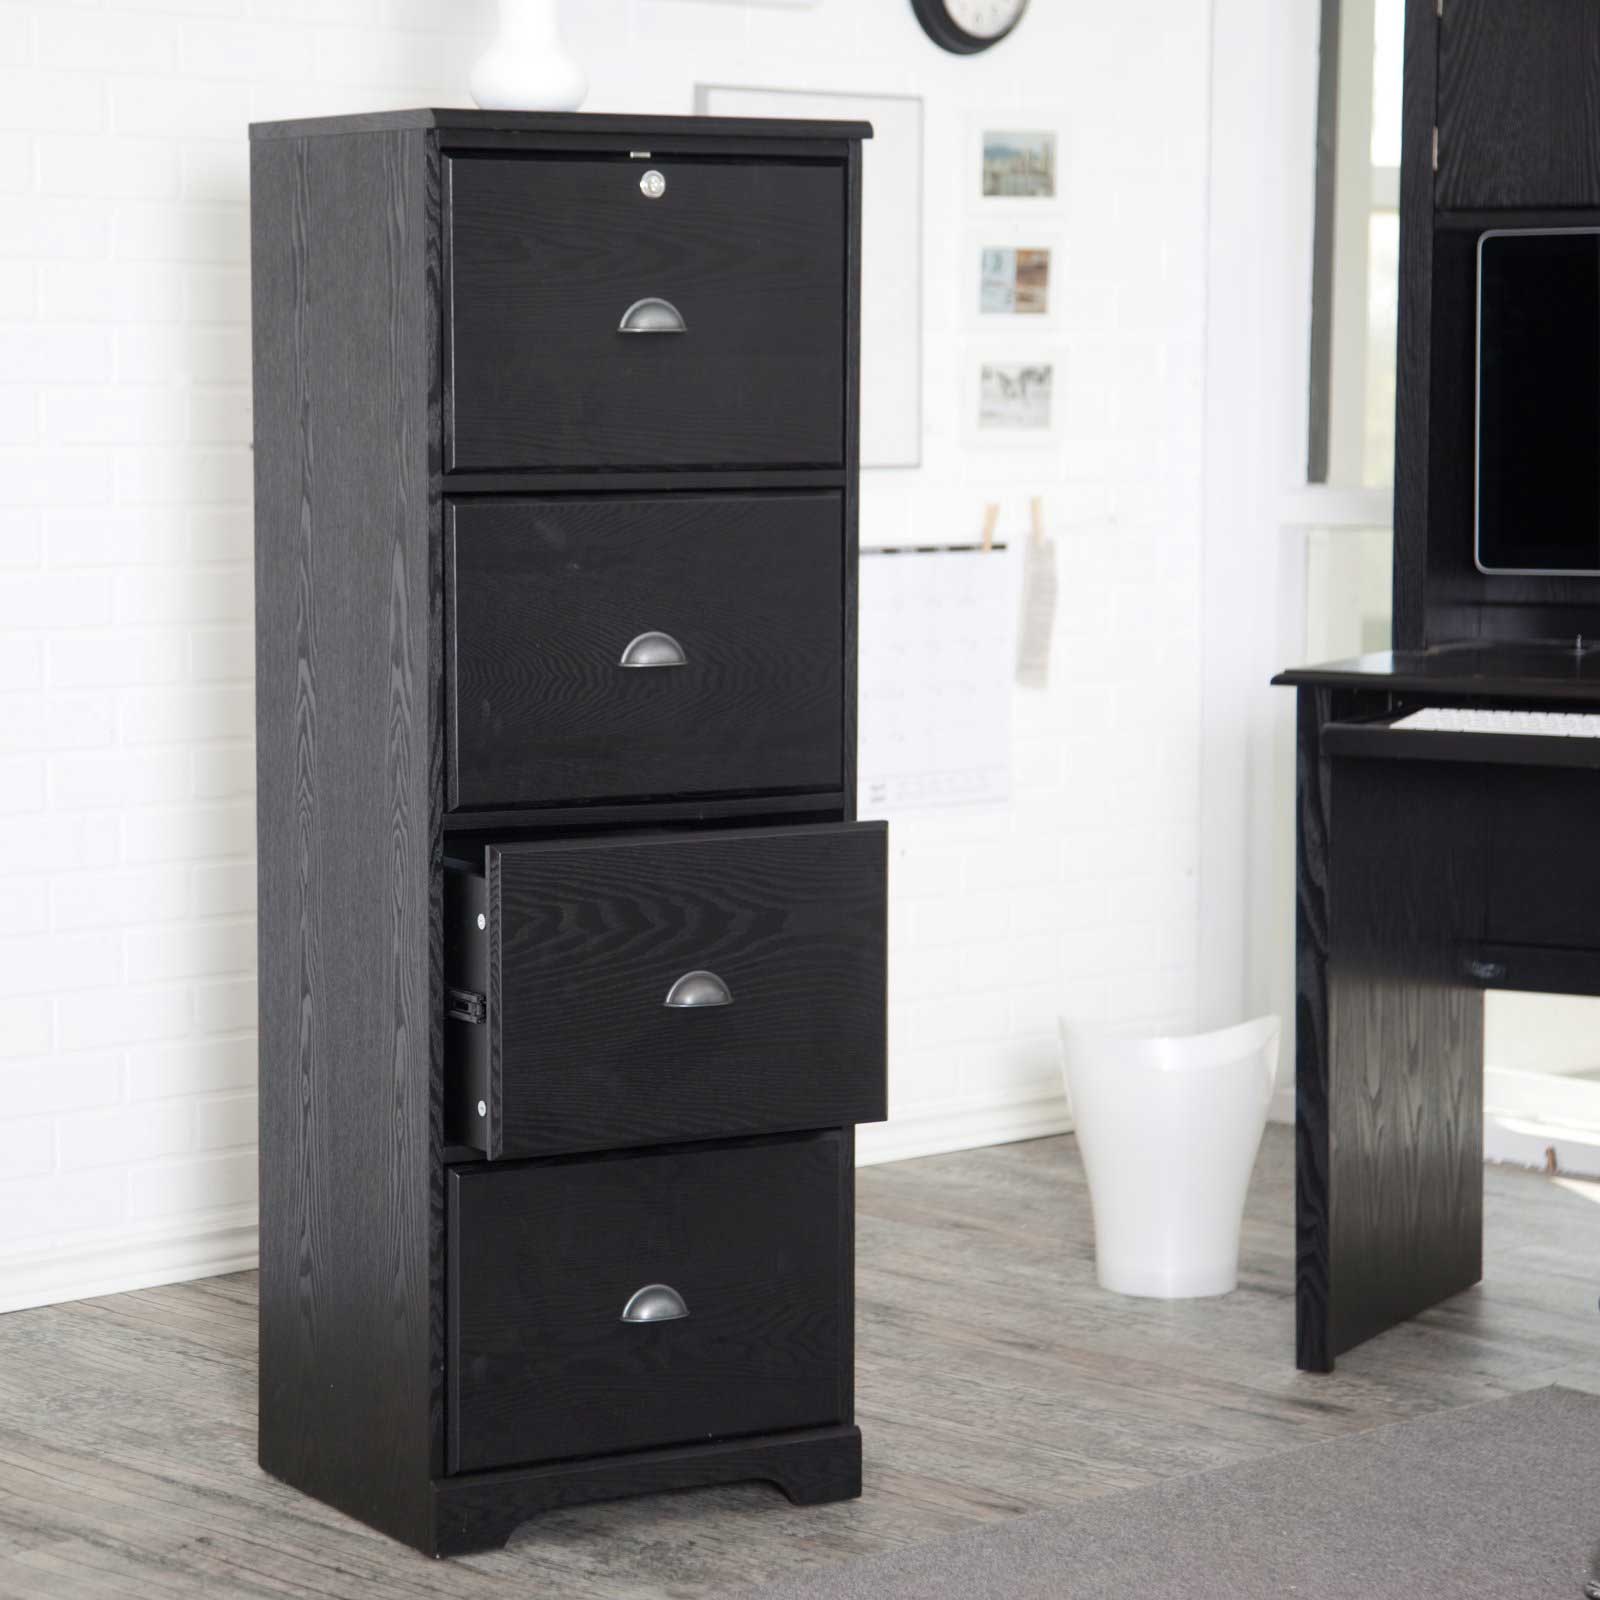 Vertical Filing Cabinets for Home Office